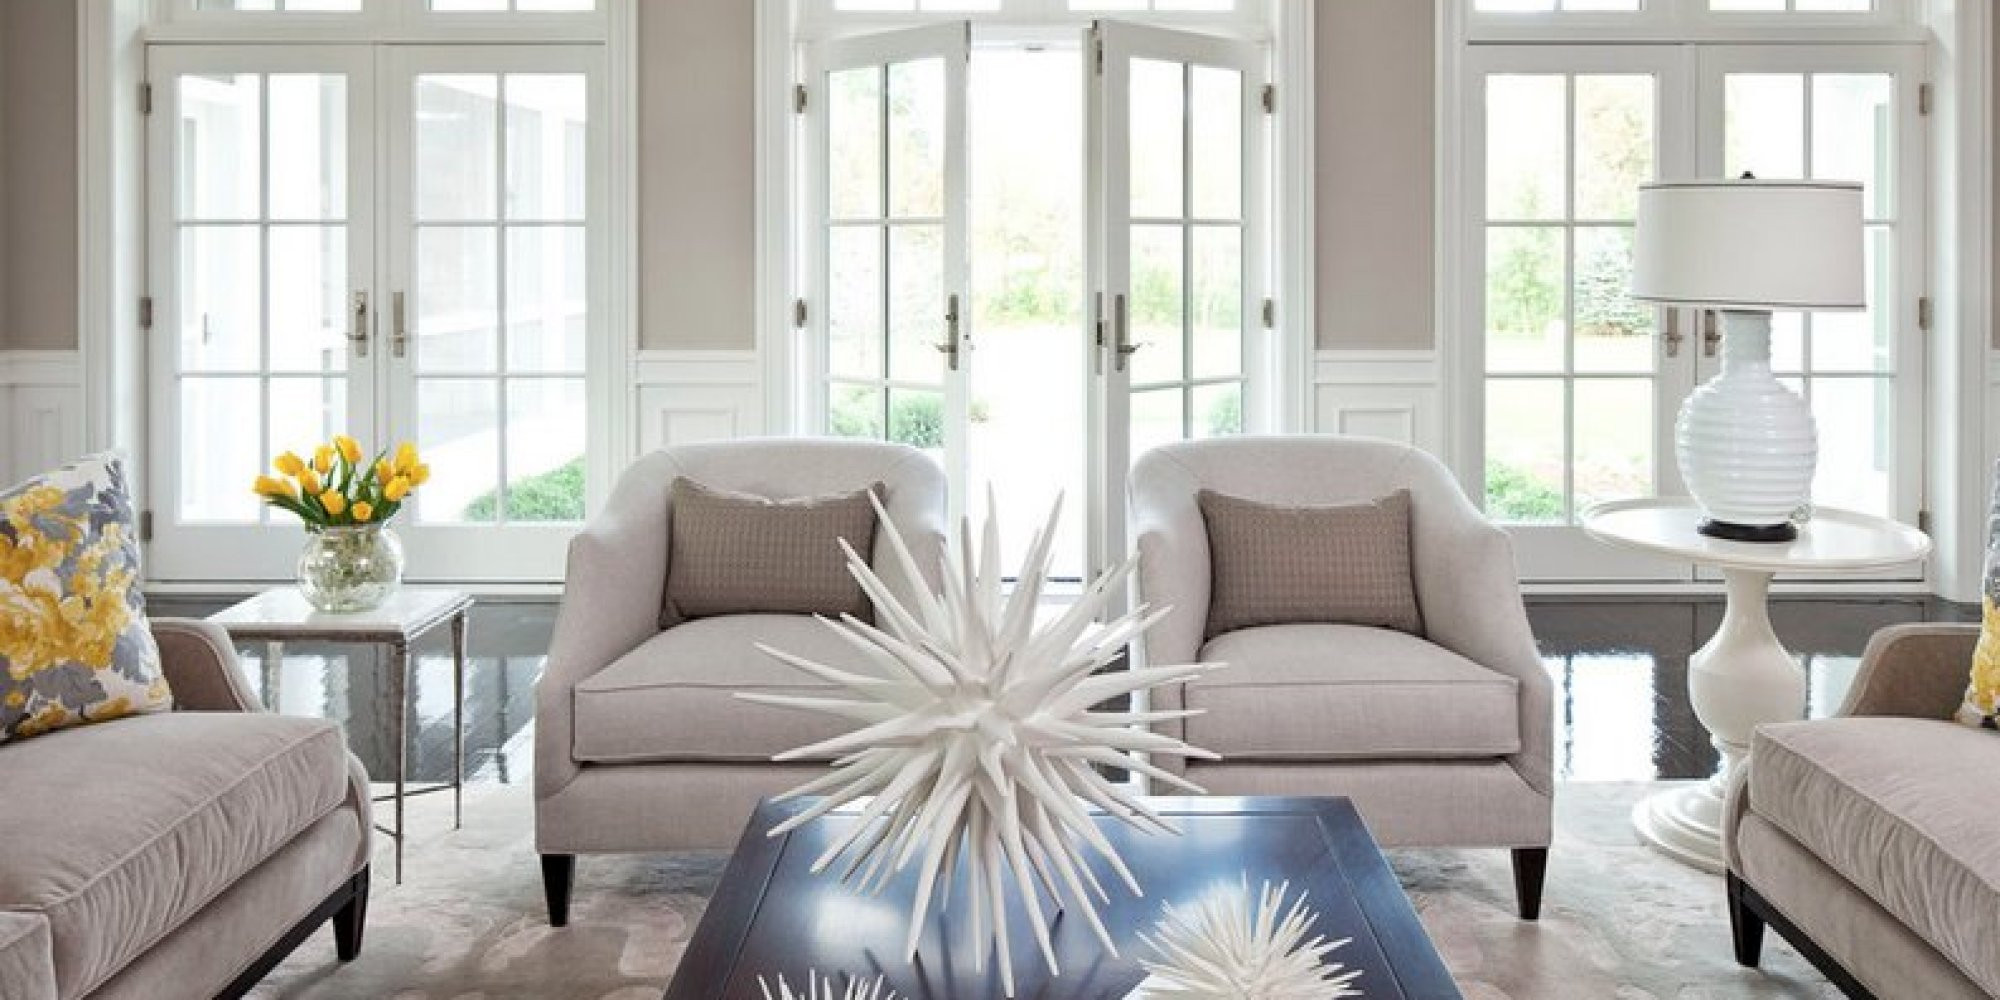 Neutral Color Living Room
 The 8 Best Neutral Paint Colors That ll Work In Any Home